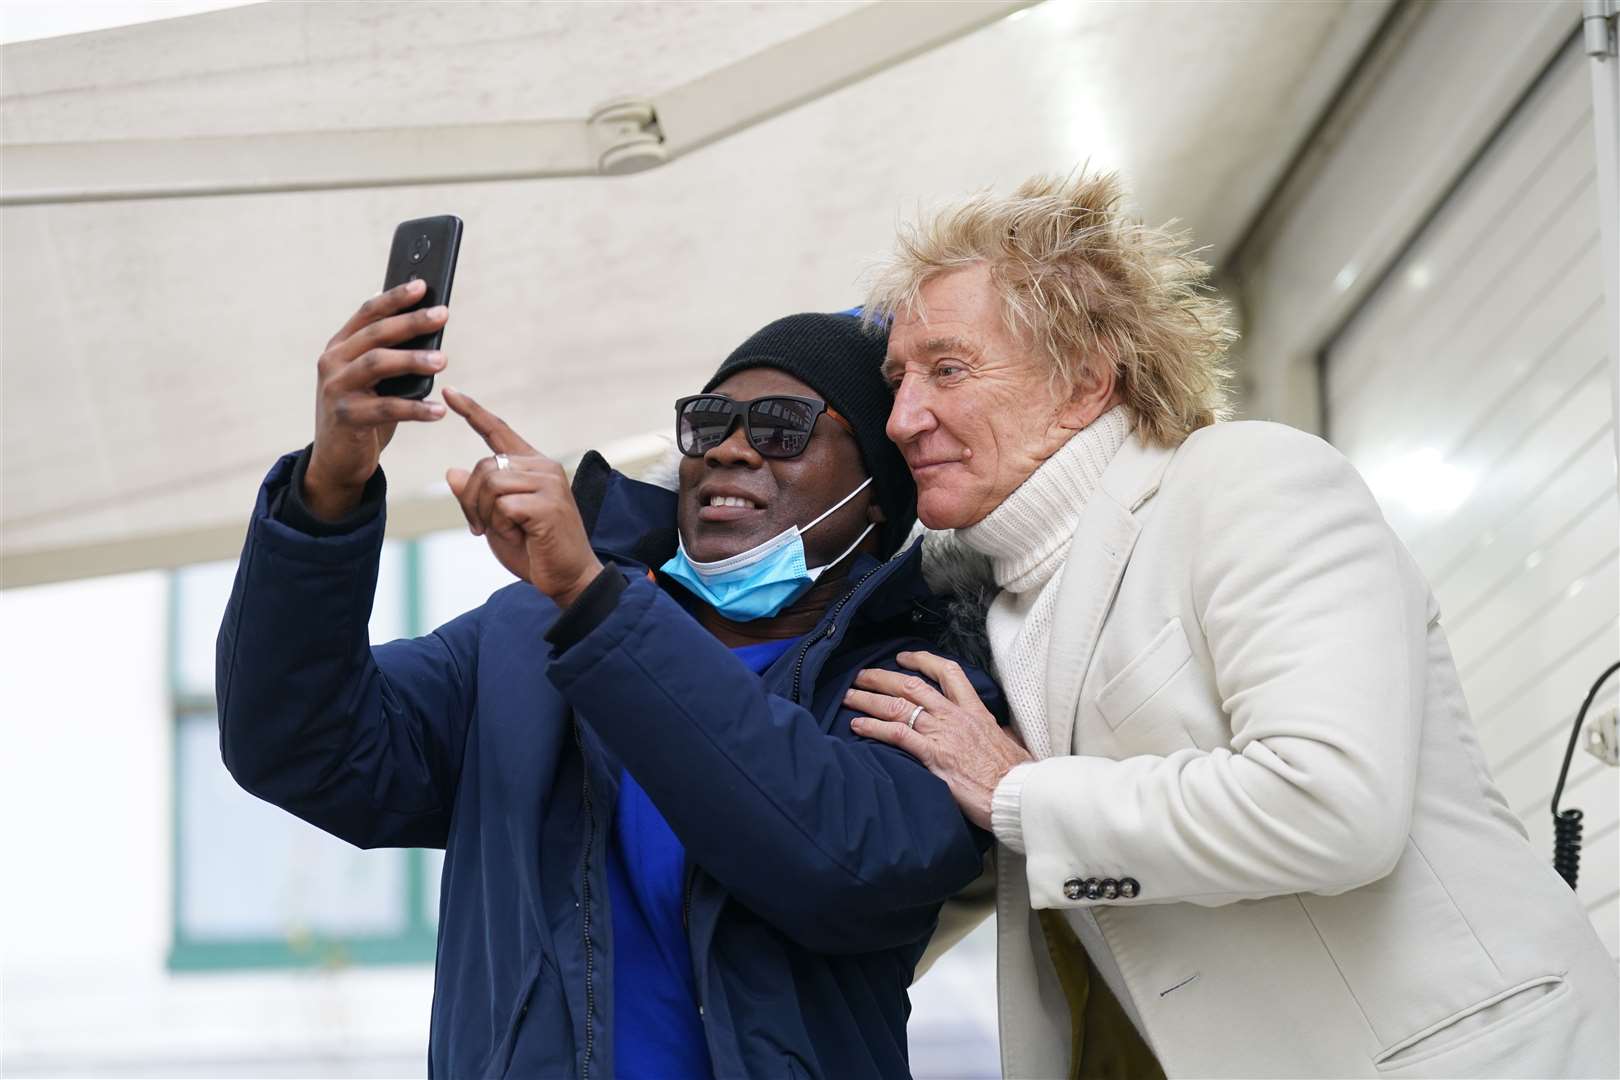 Sir Rod Stewart takes a selfie with Omarie Ryan, who received an MRI scan on his left knee (Joe Giddens/PA)